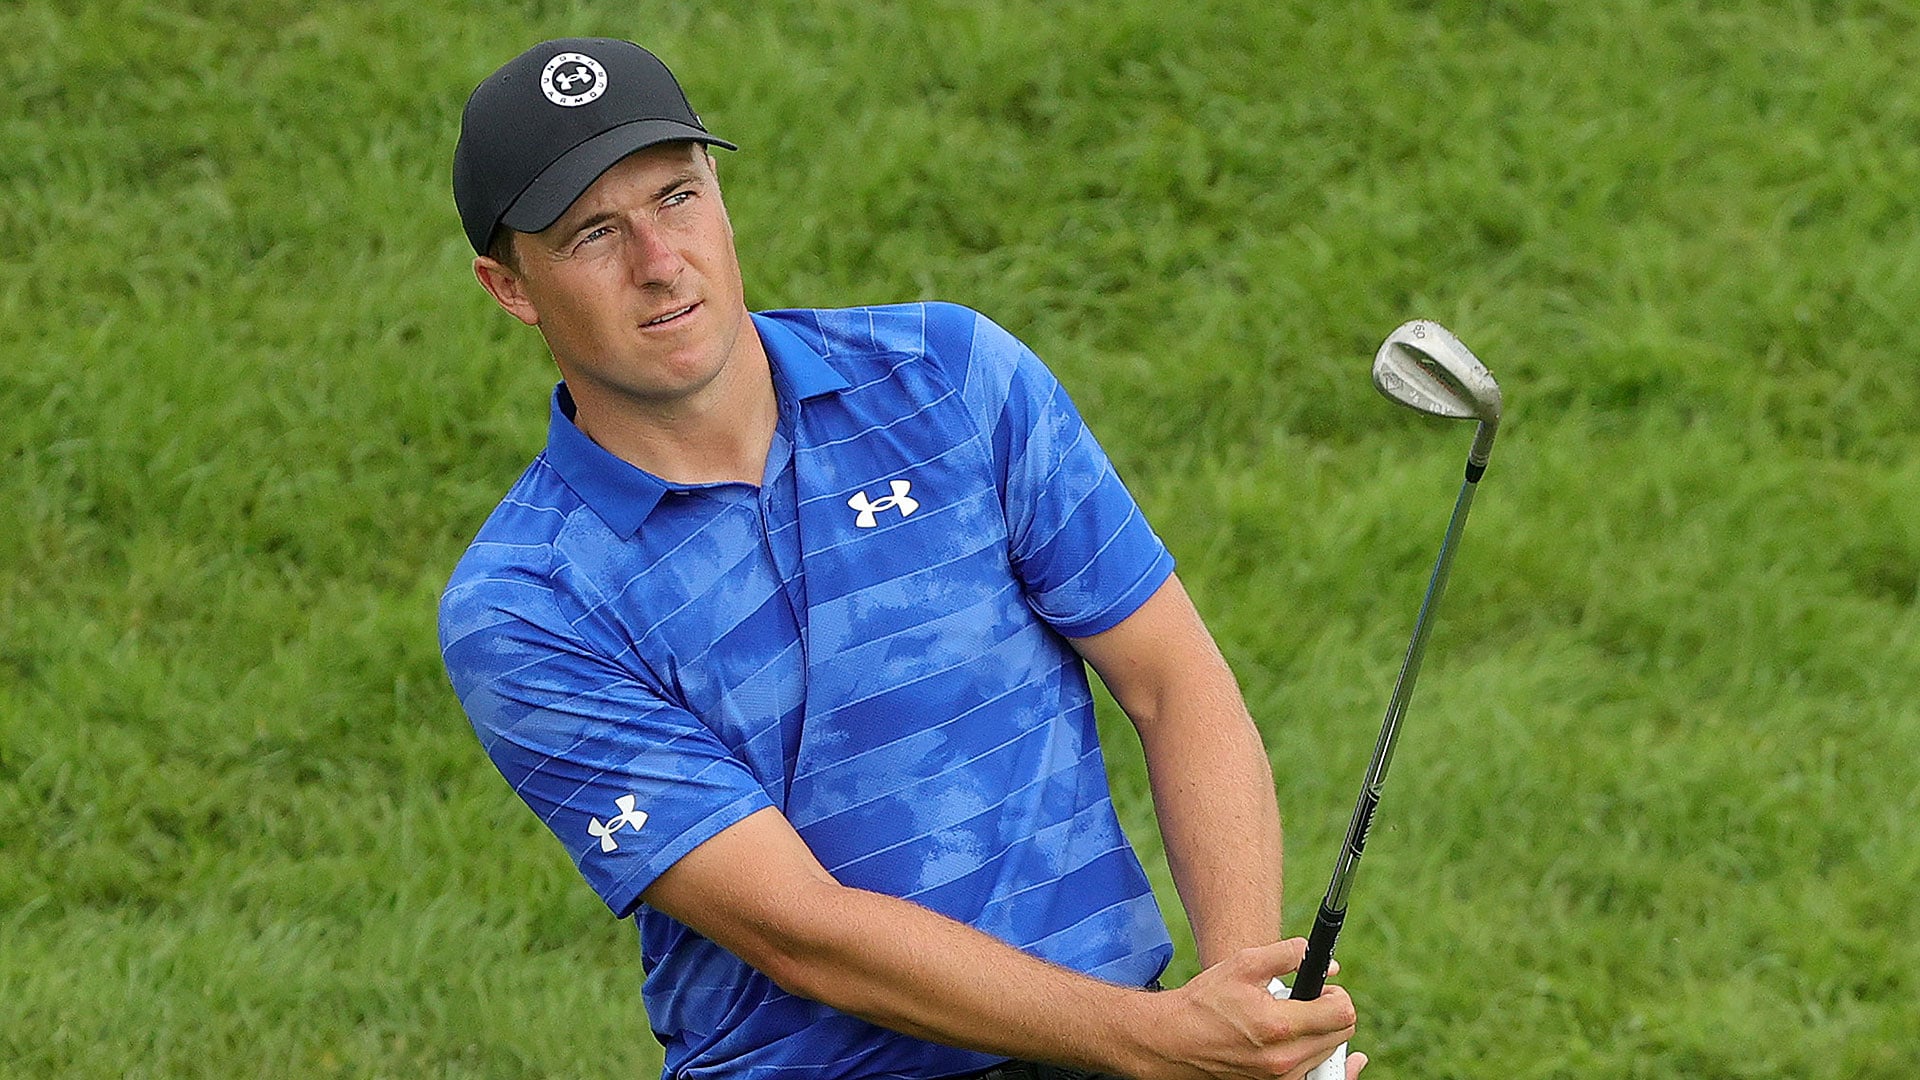 After three-year absence, Jordan Spieth back in world ranking top 10 2